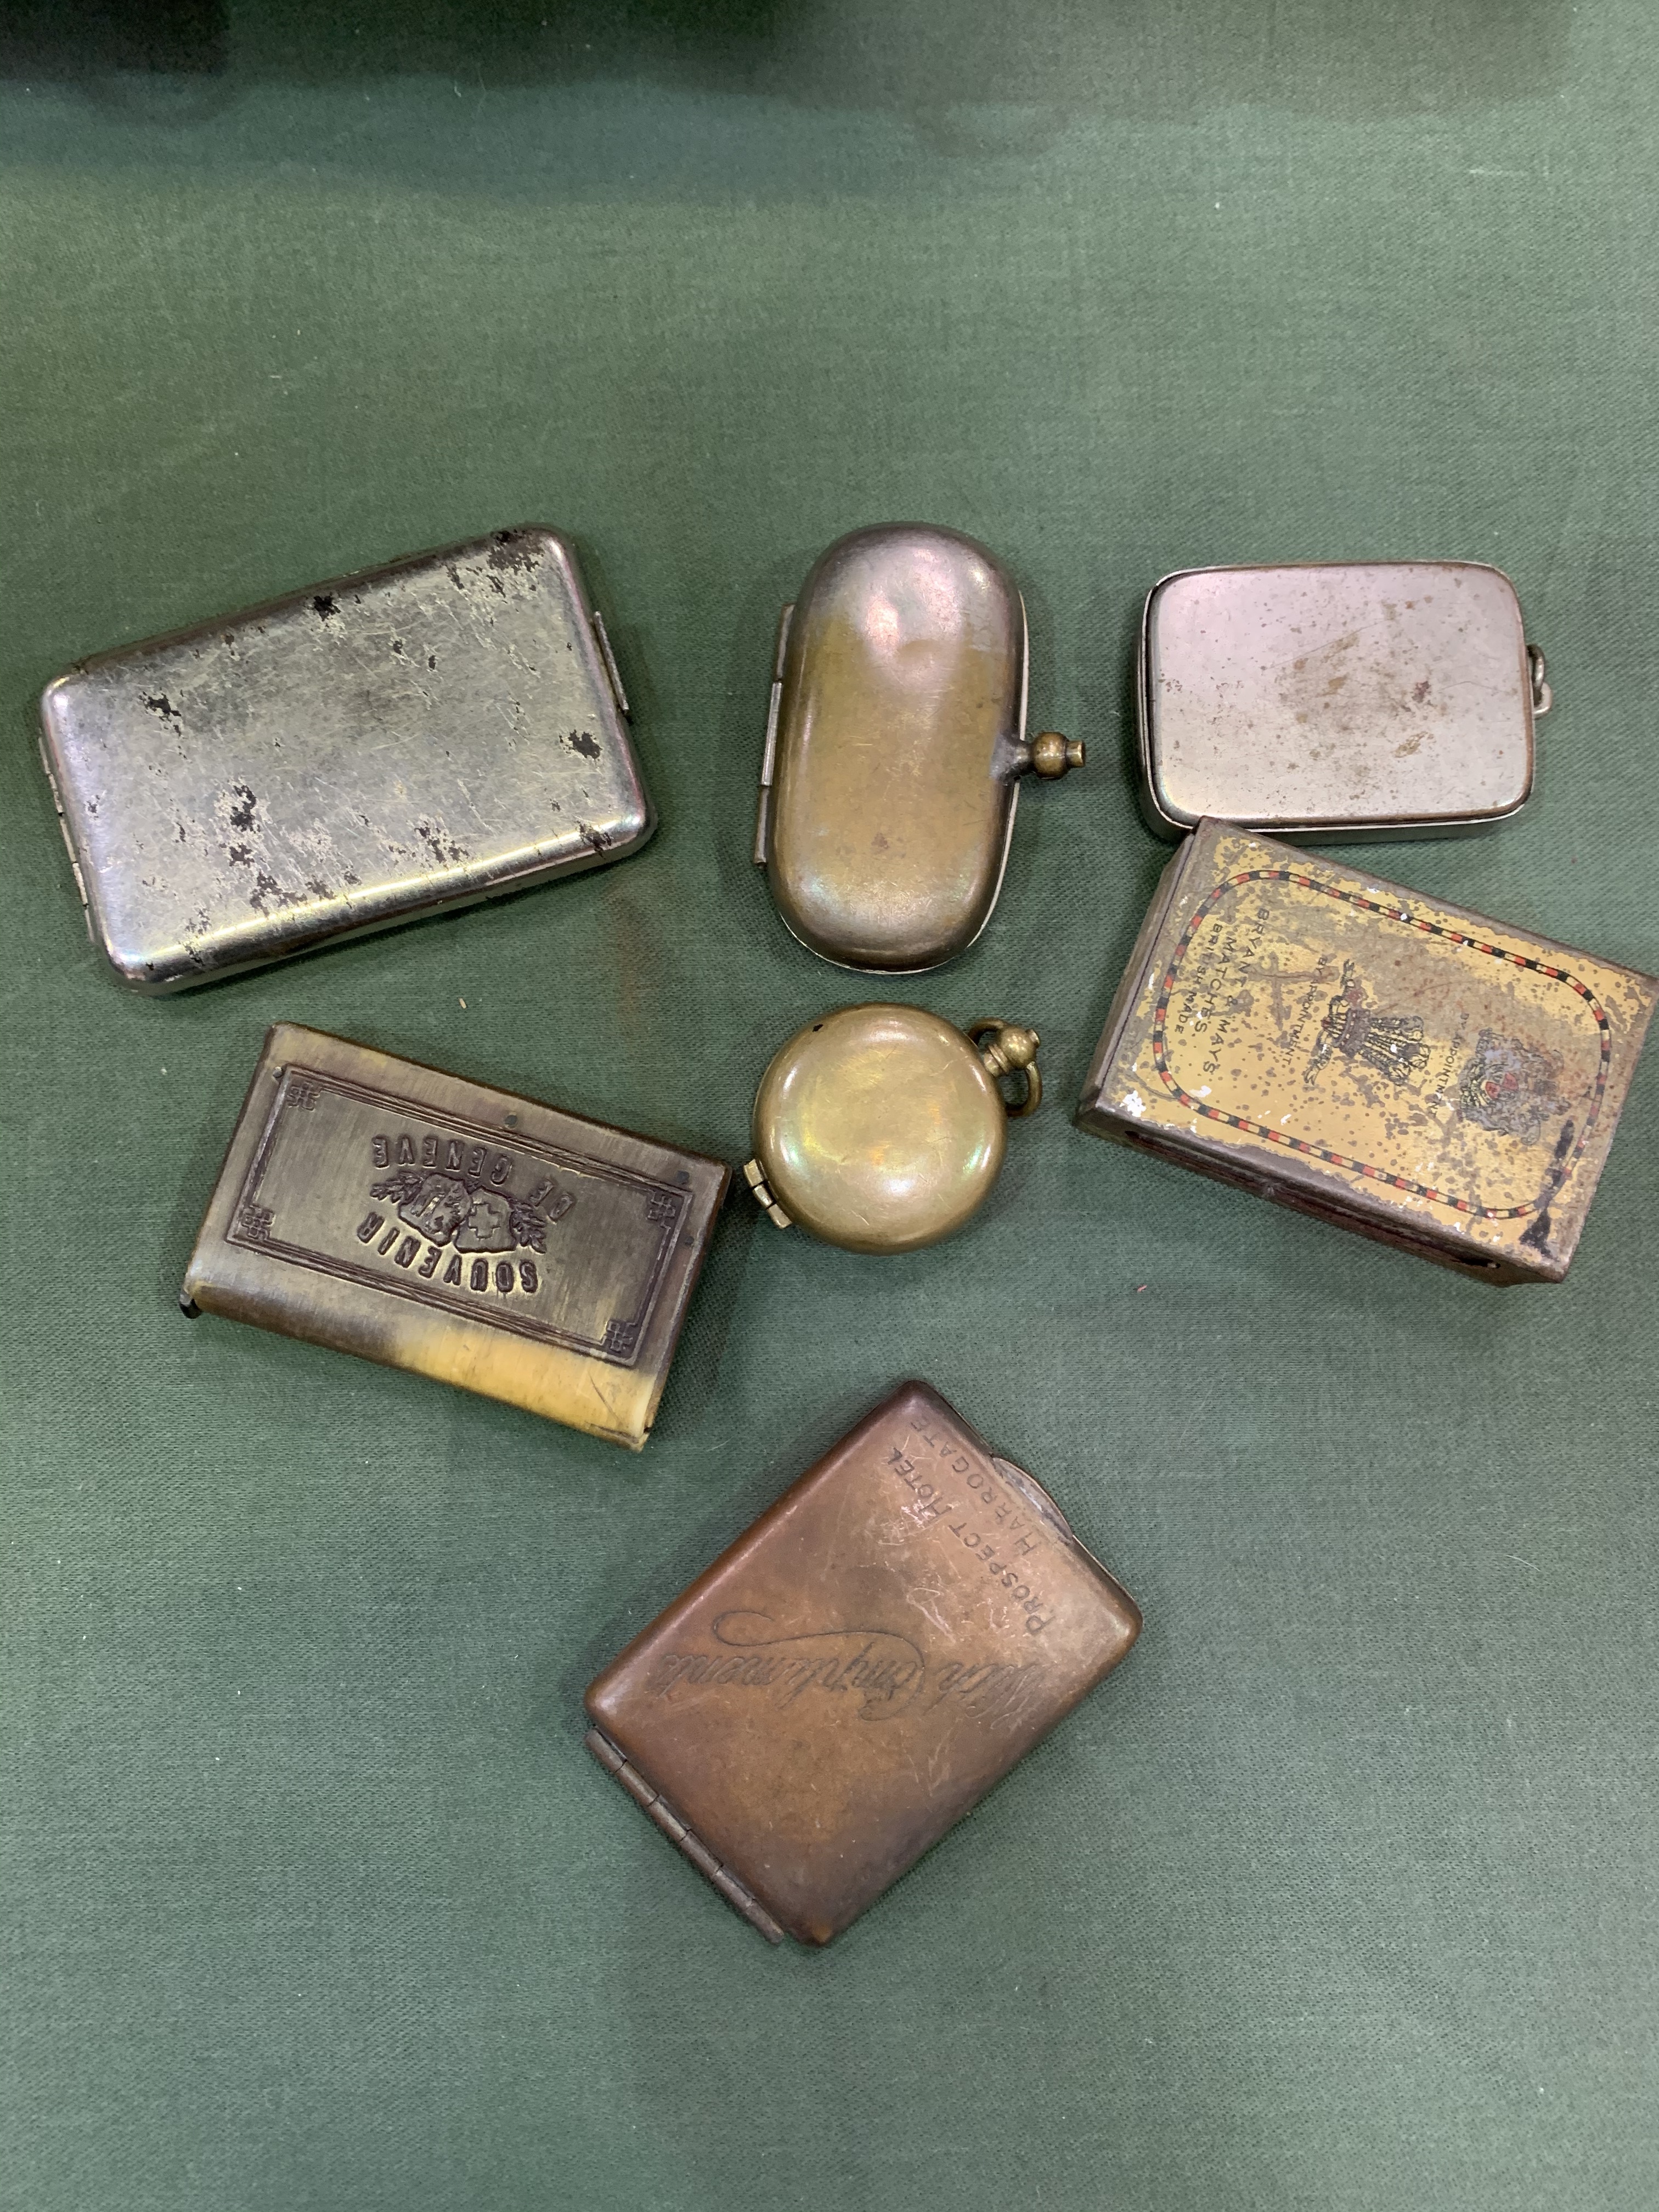 Two sovereign holders and five vintage smoking accessories.